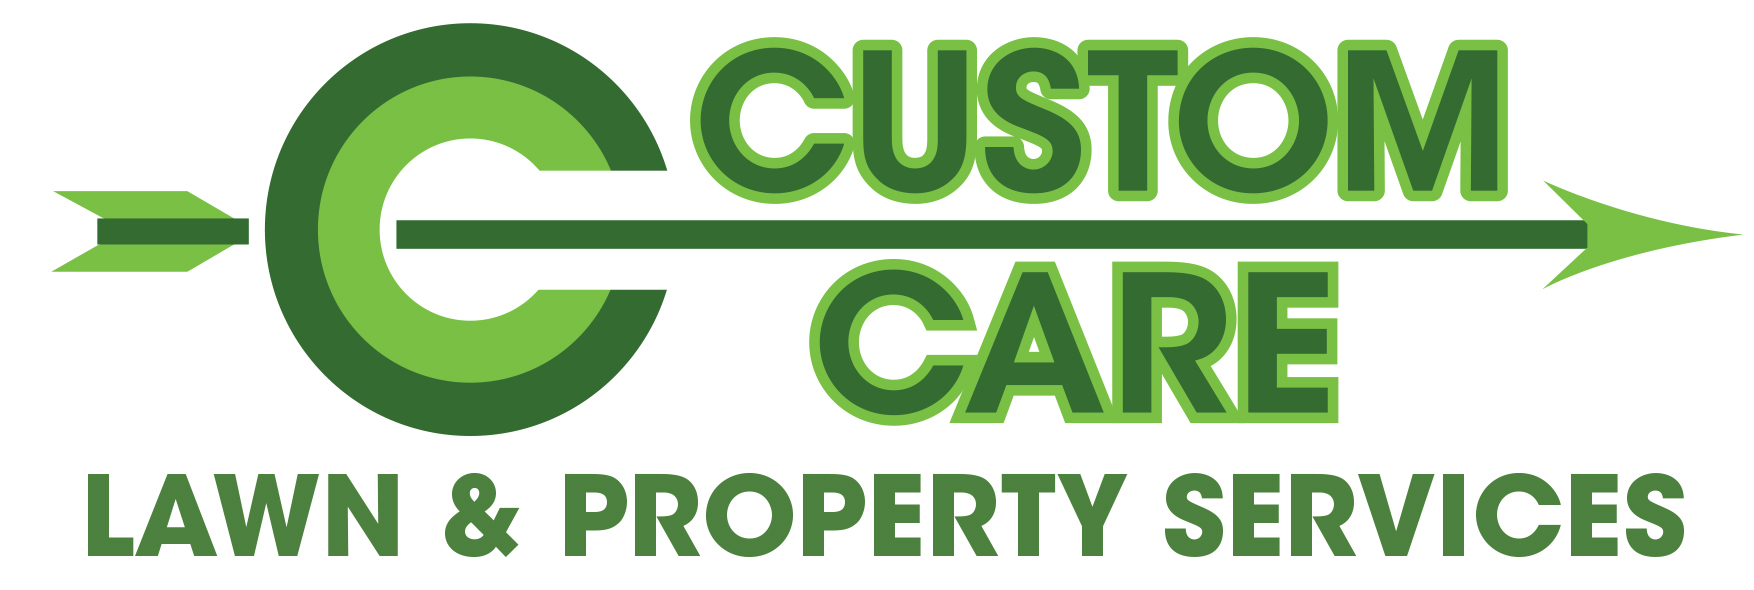 Custom Care Lawn & Property Services Inc